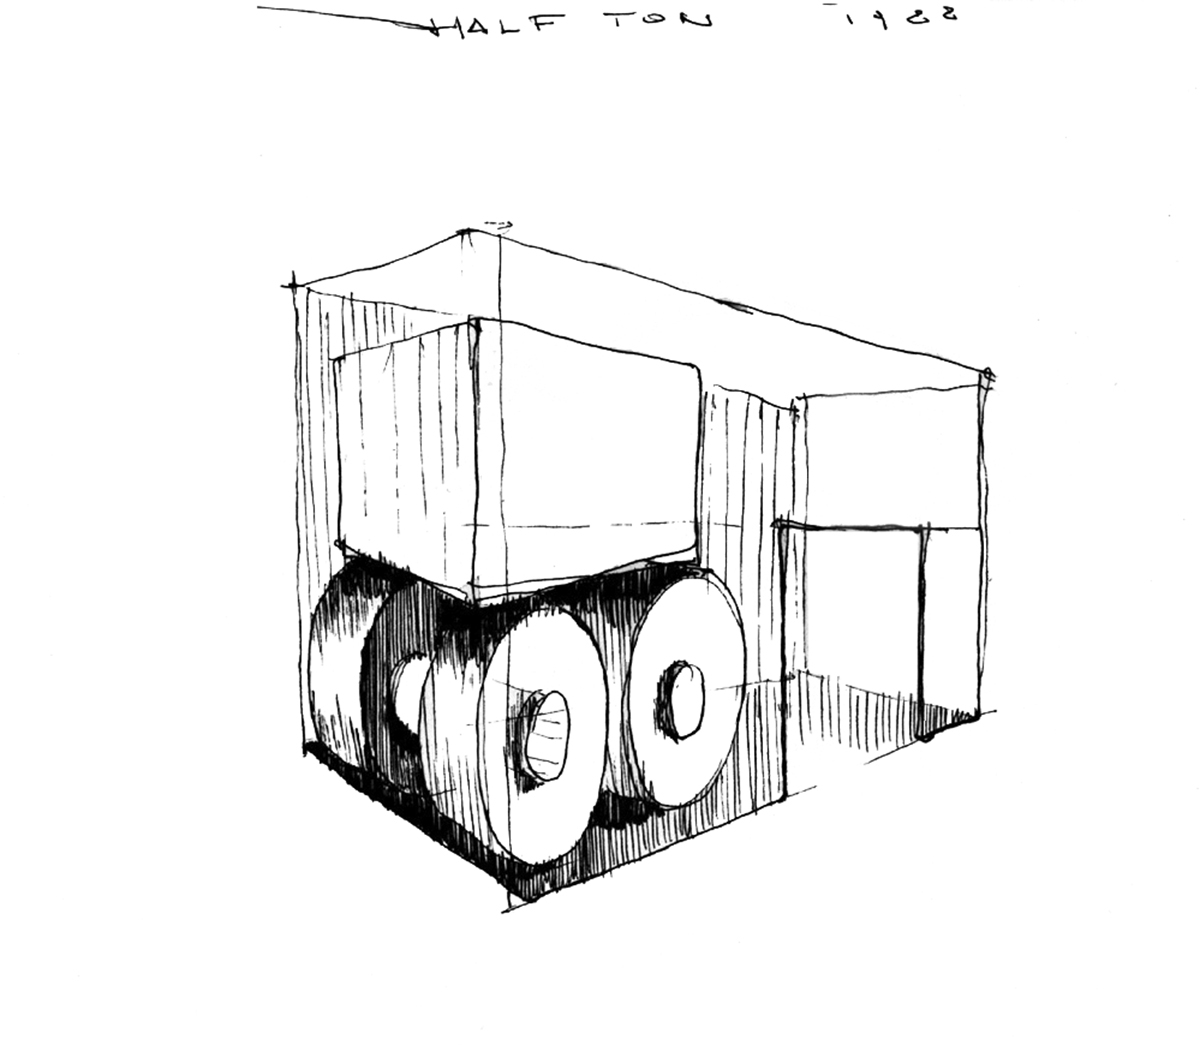 Progetto per Half Ton, Drawing of the project for the installation at Studio Marconi 17, Milan